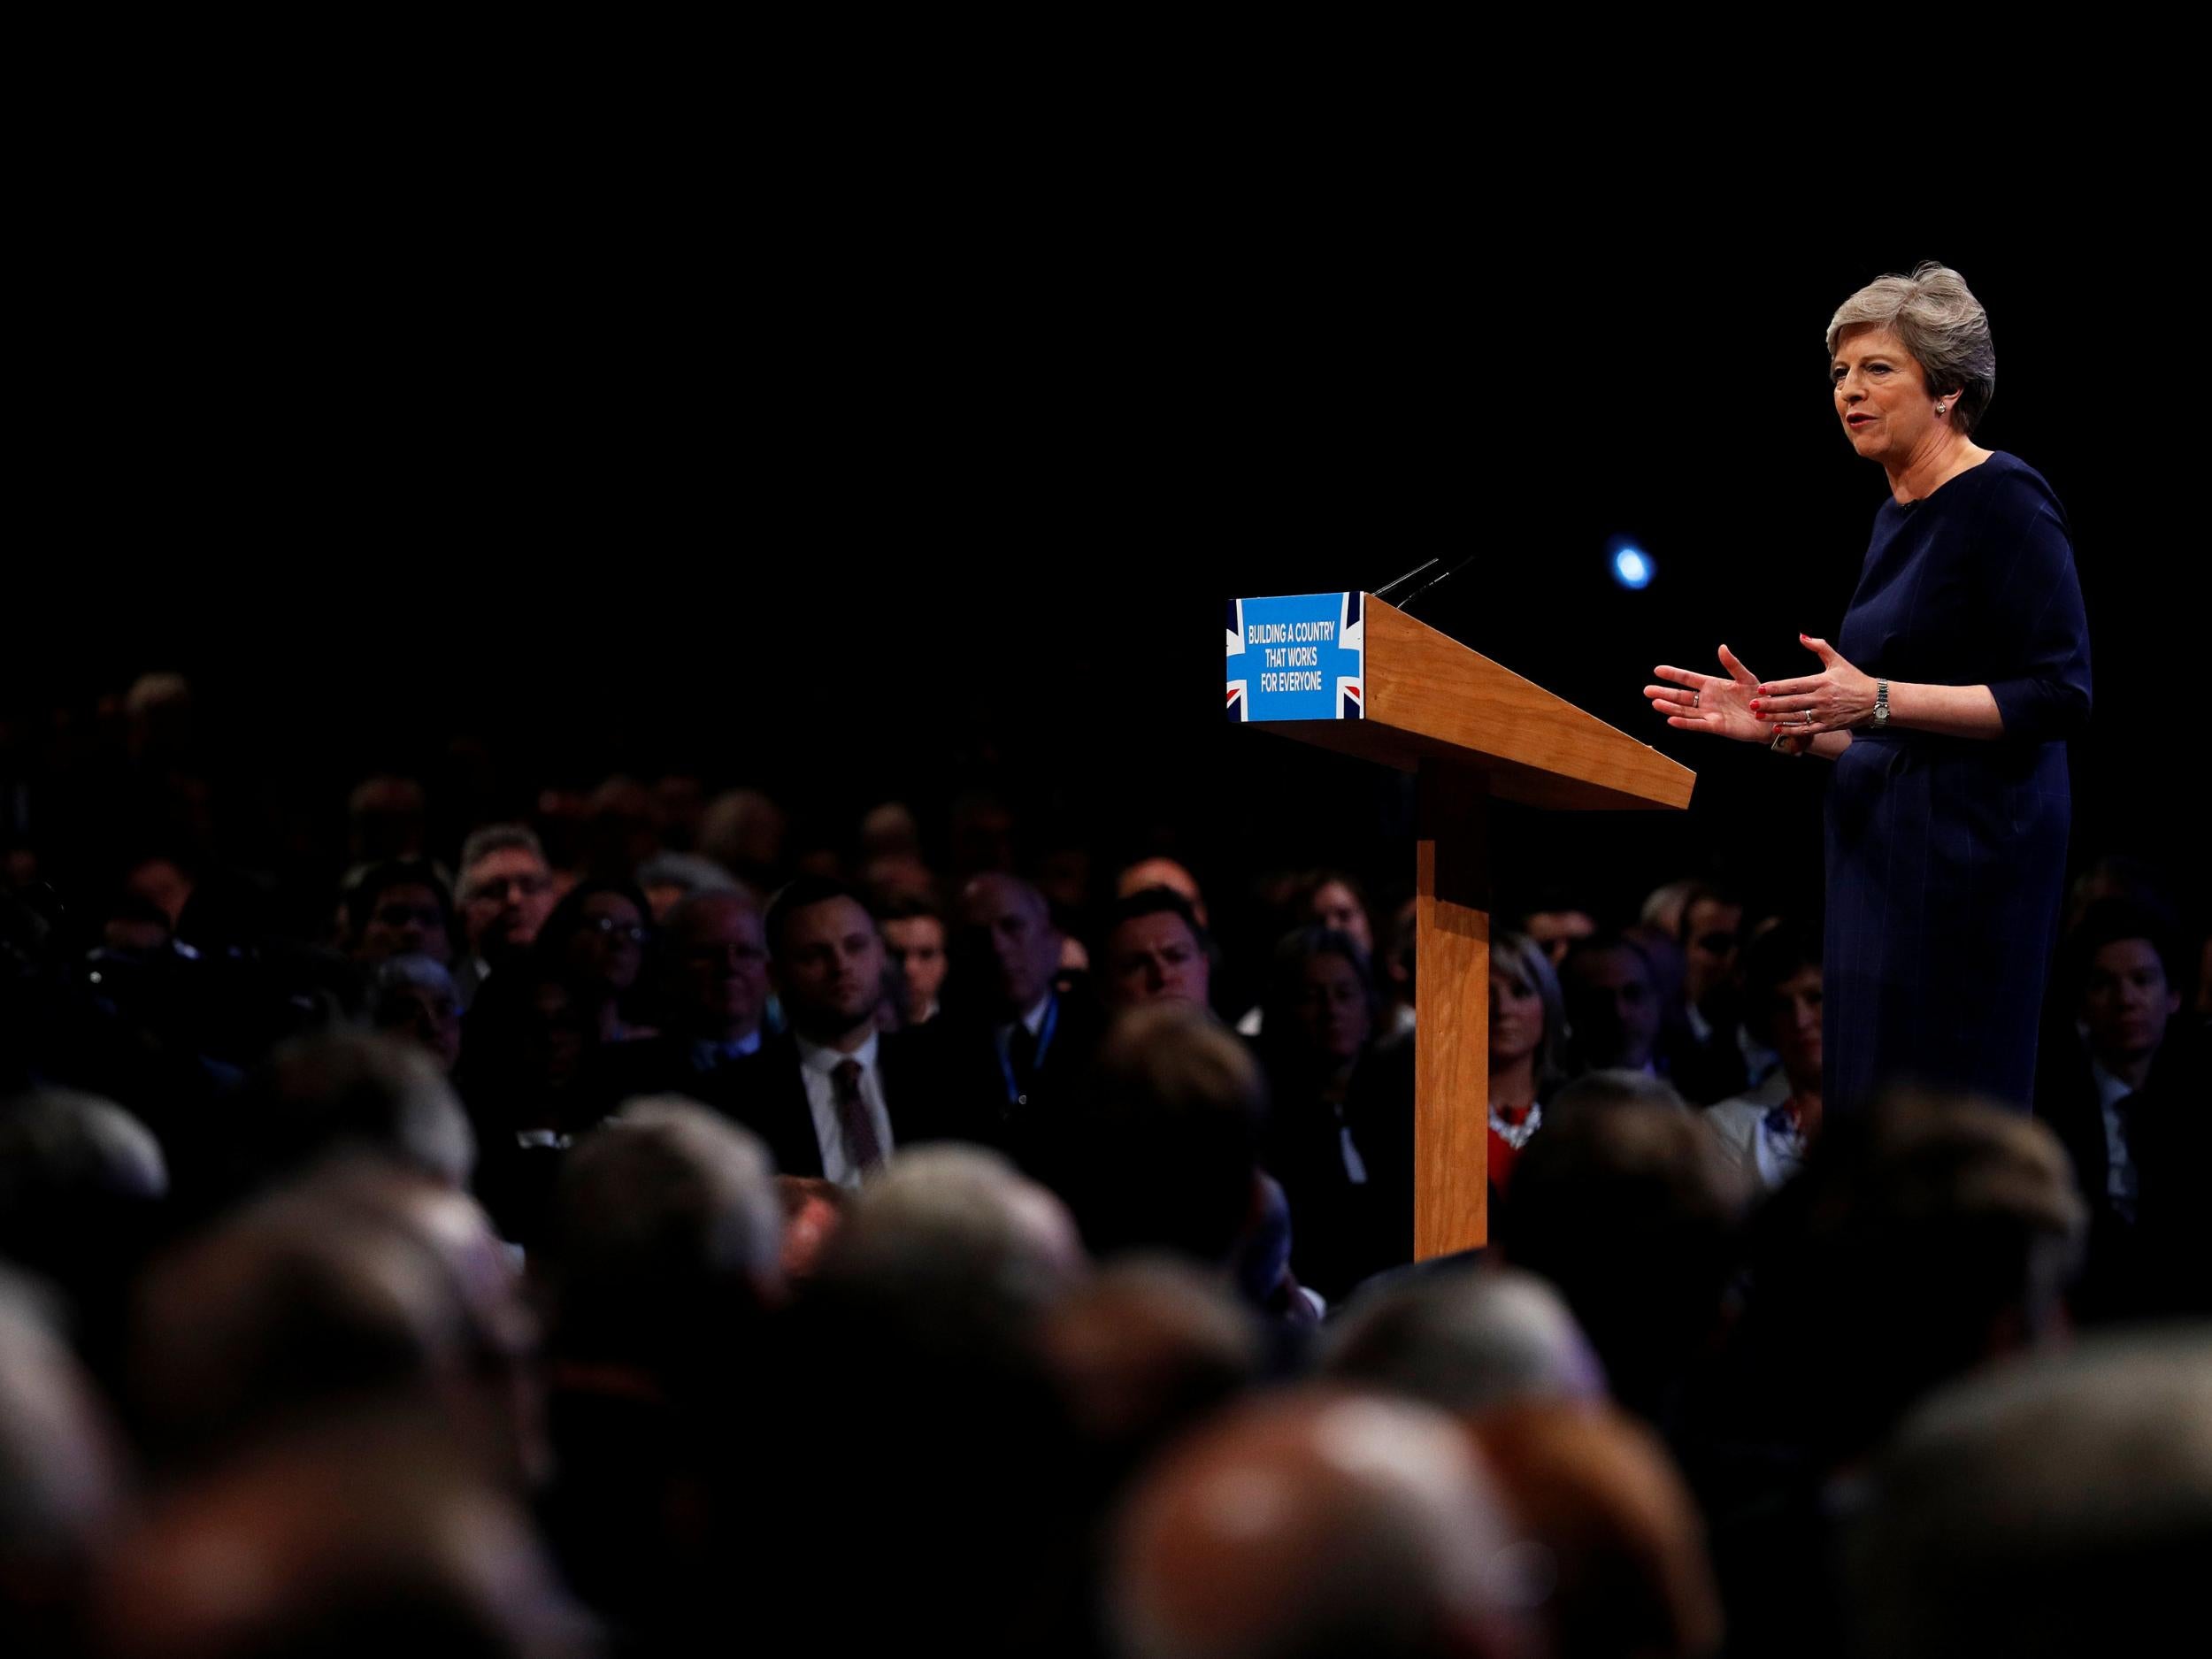 Conservative leader and Prime Minister Theresa May speaking at the Conservative Party conference to an audience of all ages